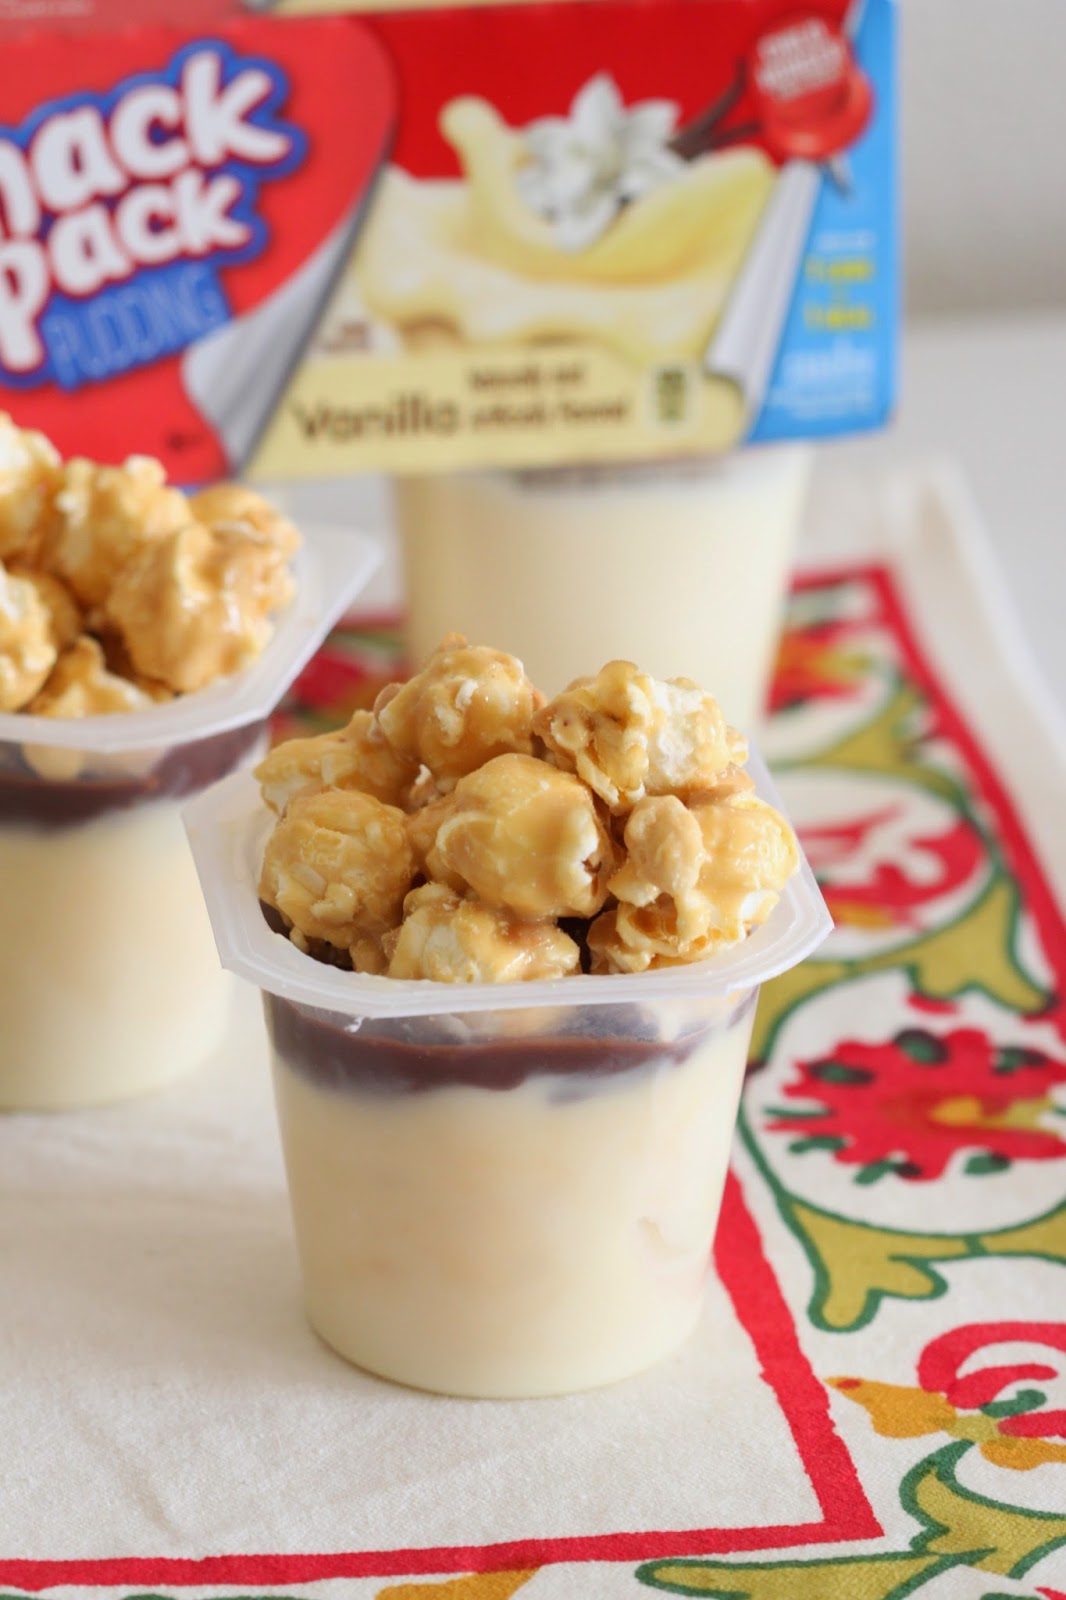 Salted Caramel Pudding with Toffee Popcorn | Tortillas and Honey